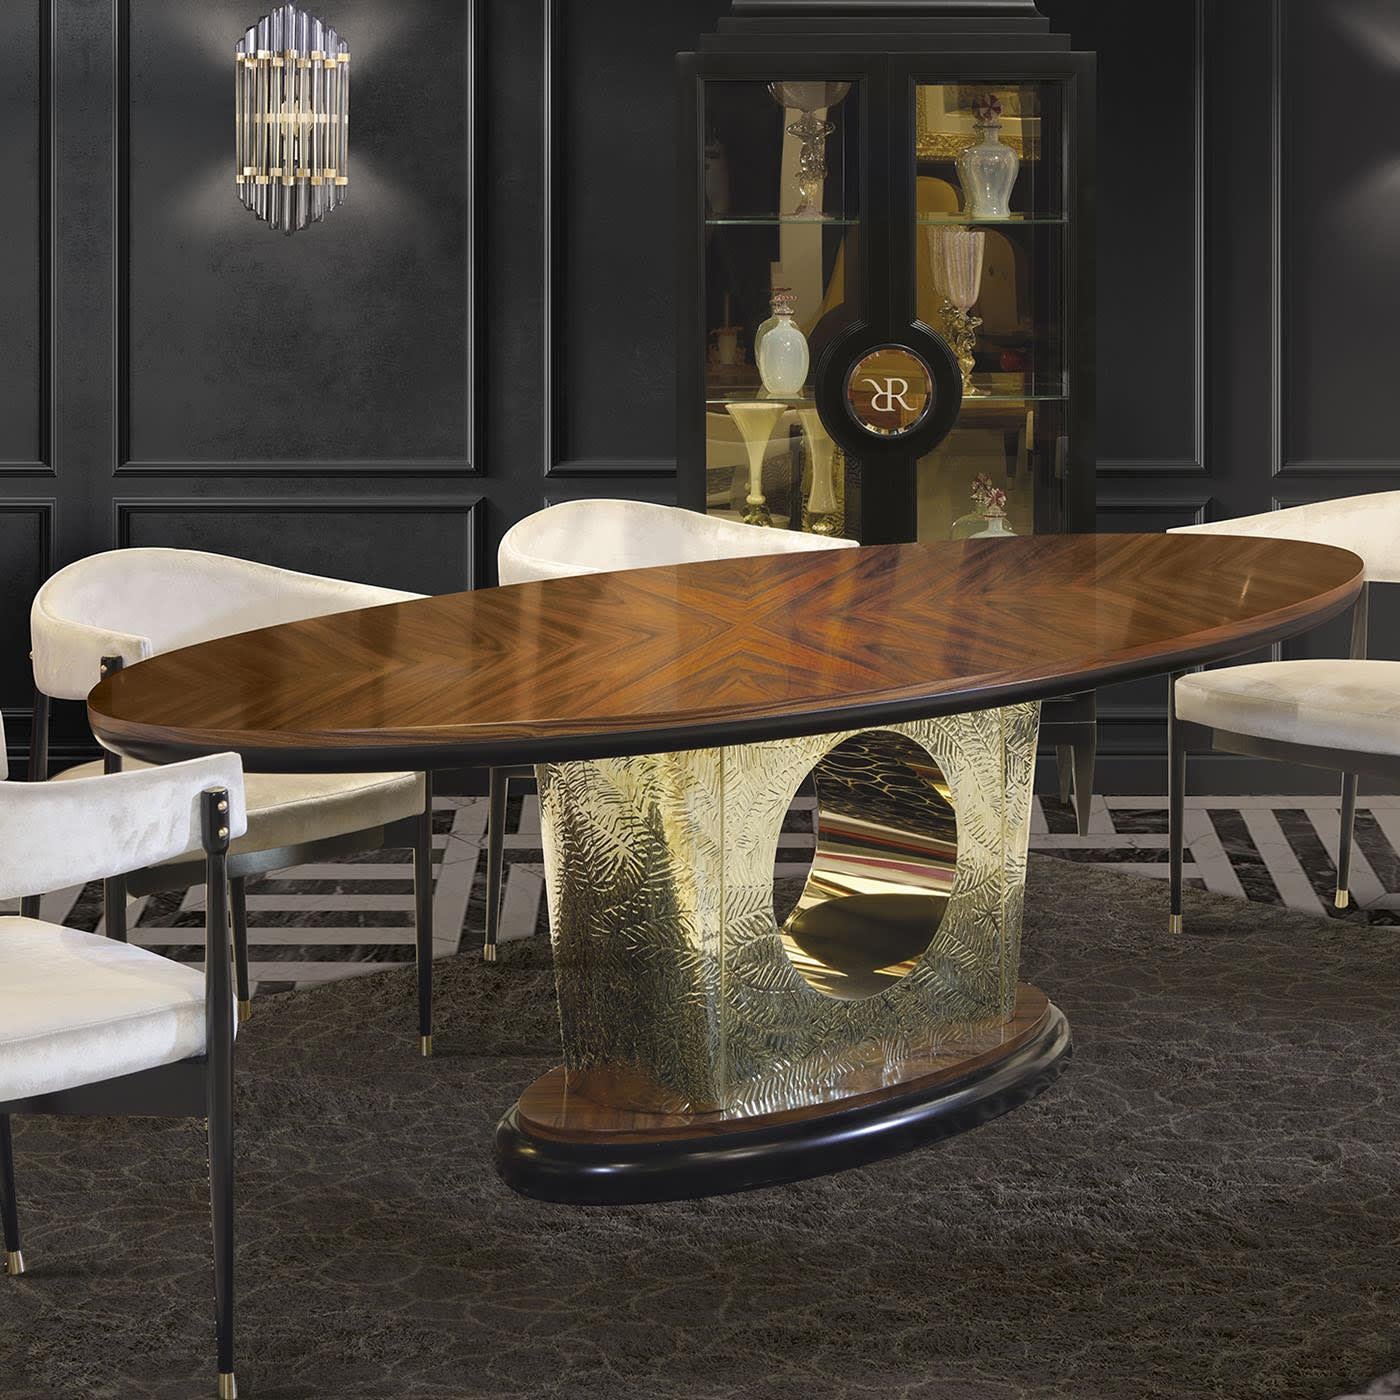 A statement of undoubted opulence, this oval dining table will take center stage in exclusive interior decors. Interposed between the stately oval top and the coordinated base - both fashioned of prized Santos rosewood and enriched with black